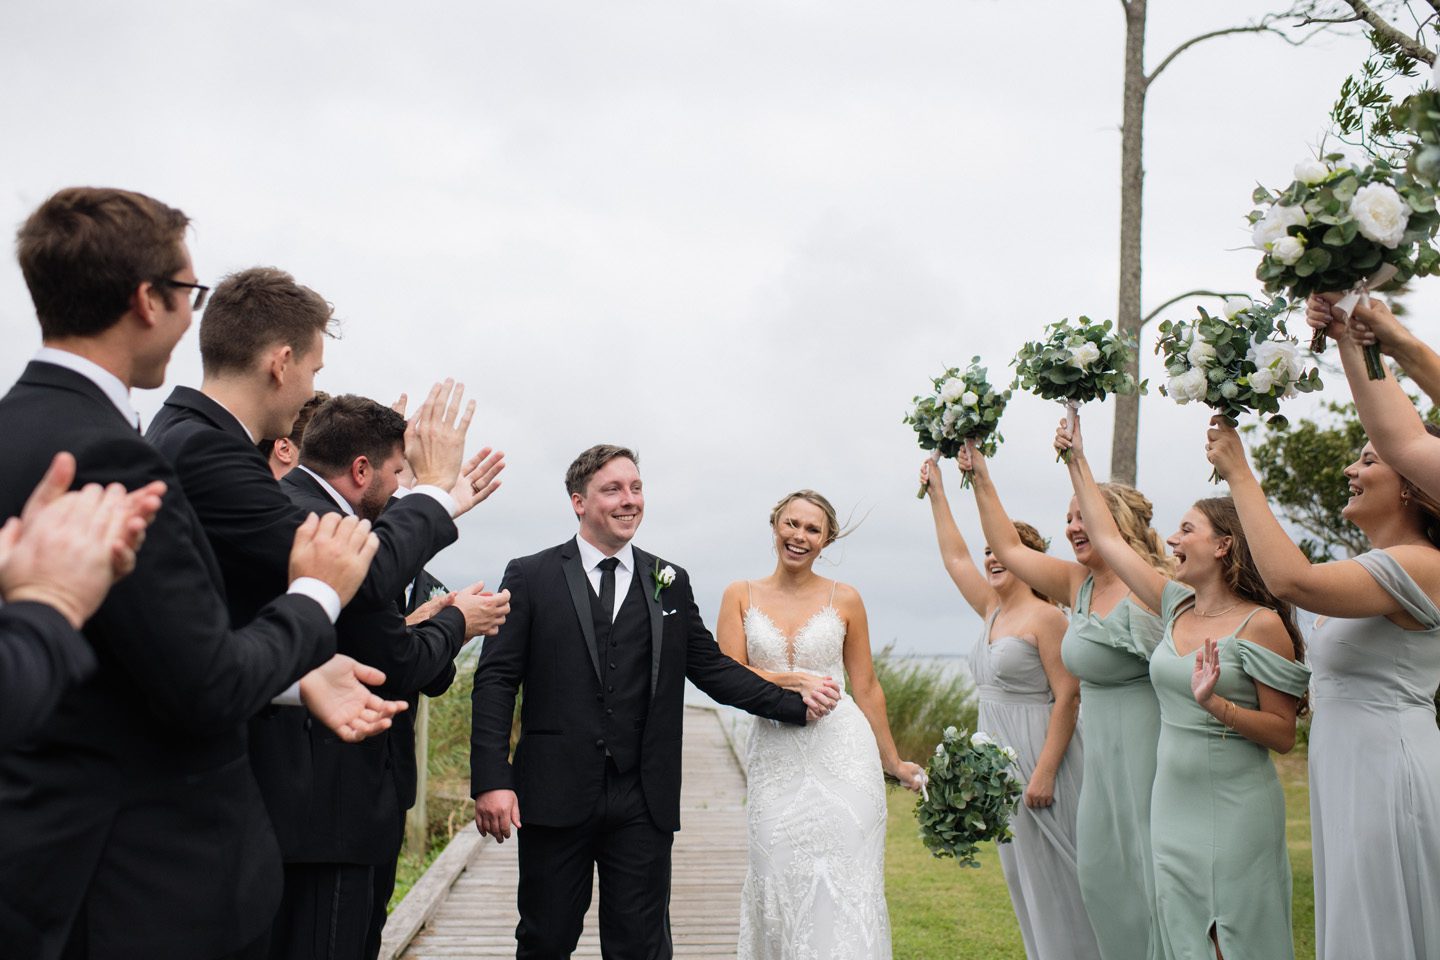 Outer Banks wedding photographer at Festival Park in Manteo